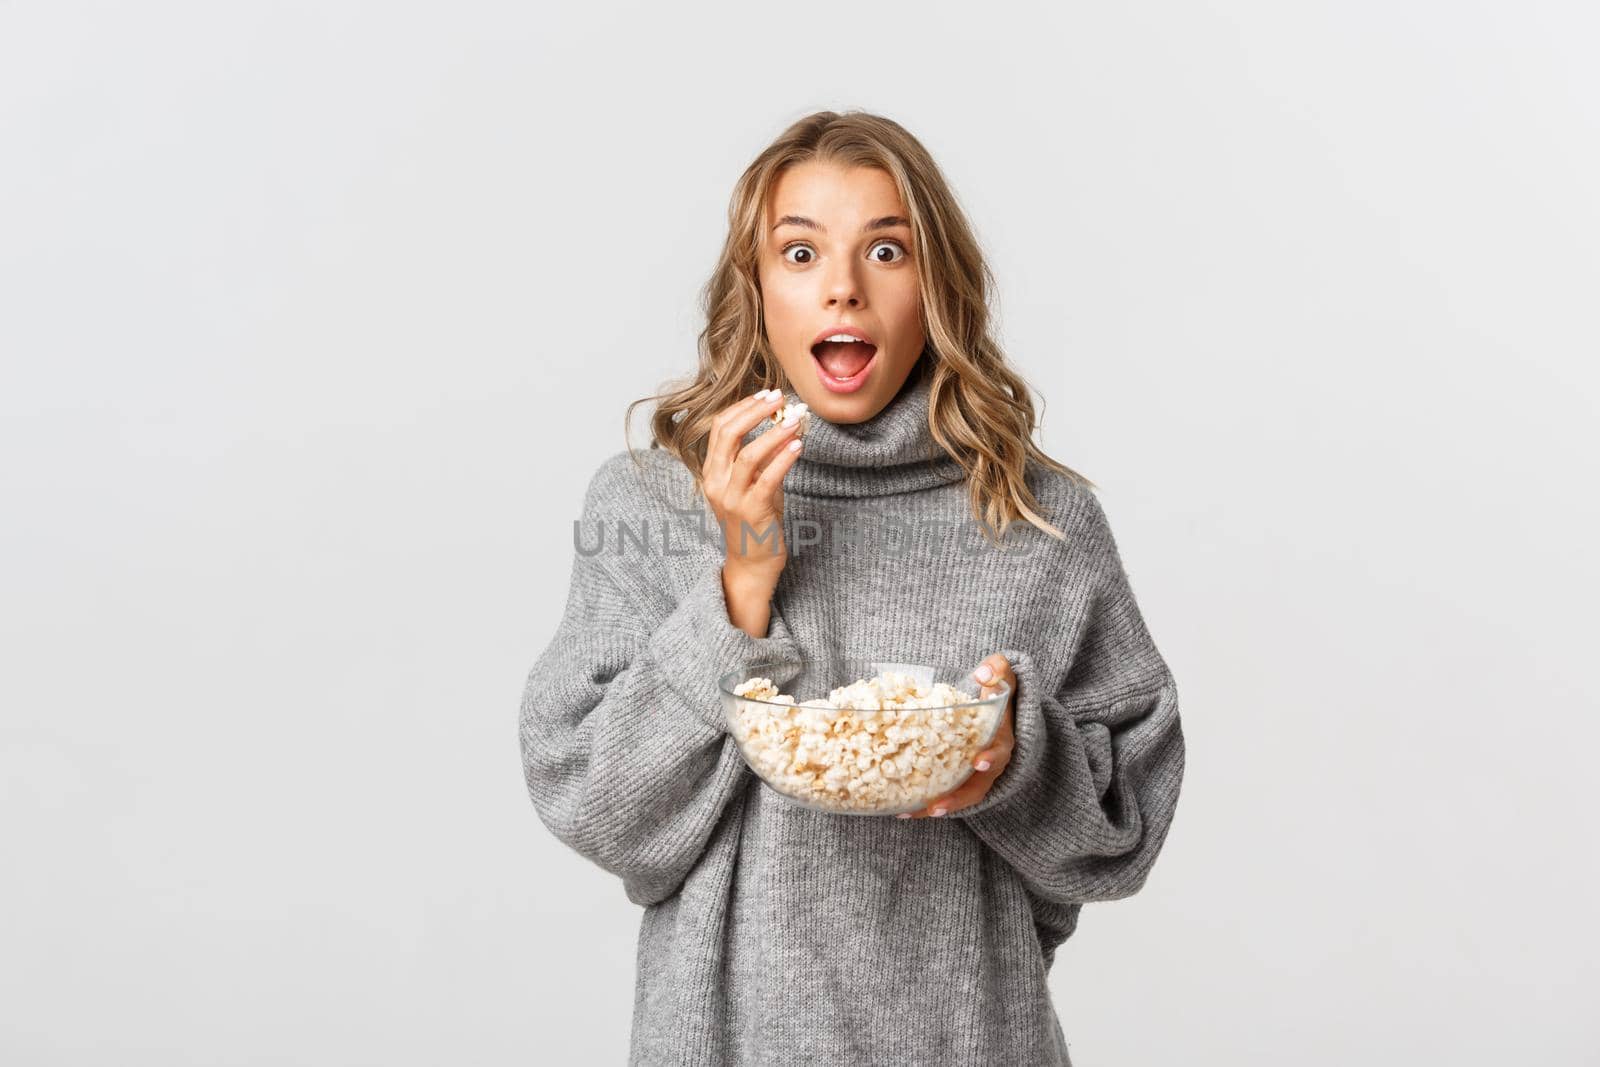 Image of amazed blond girl watching movie, looking excited, eating popcorn, standing over white background.